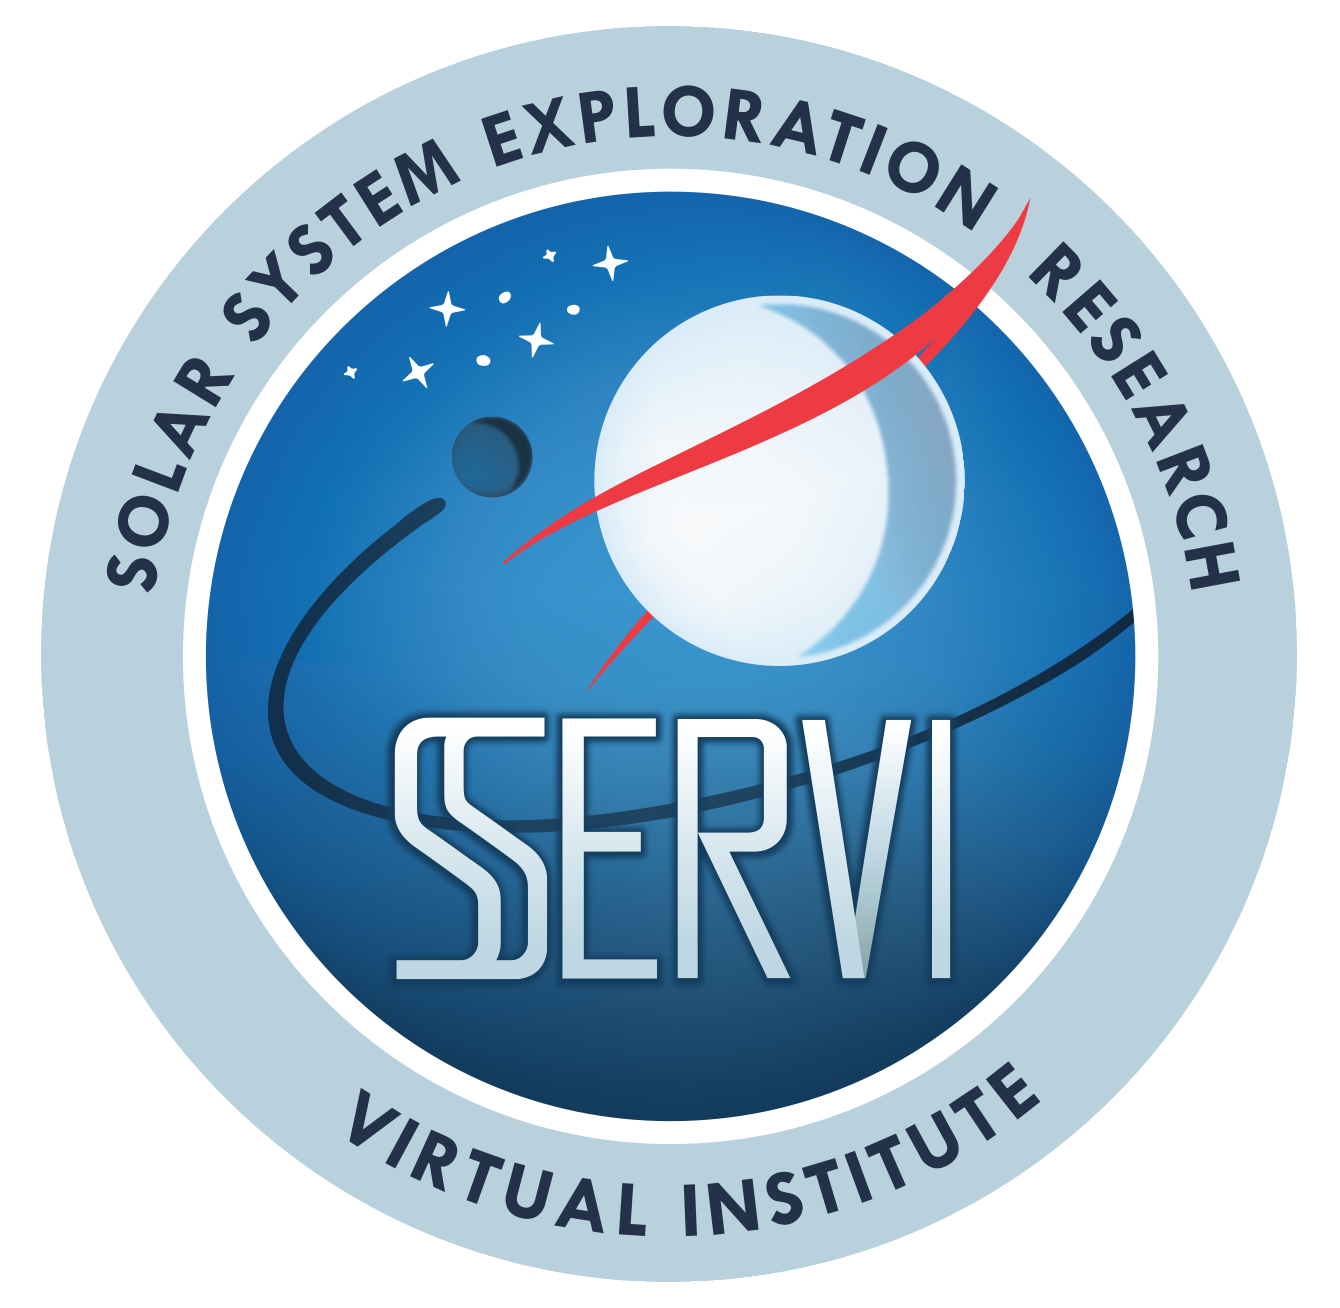 Solar System Exploration Research Virtual Institute written around a round logo picturing an object orbiting a white planet